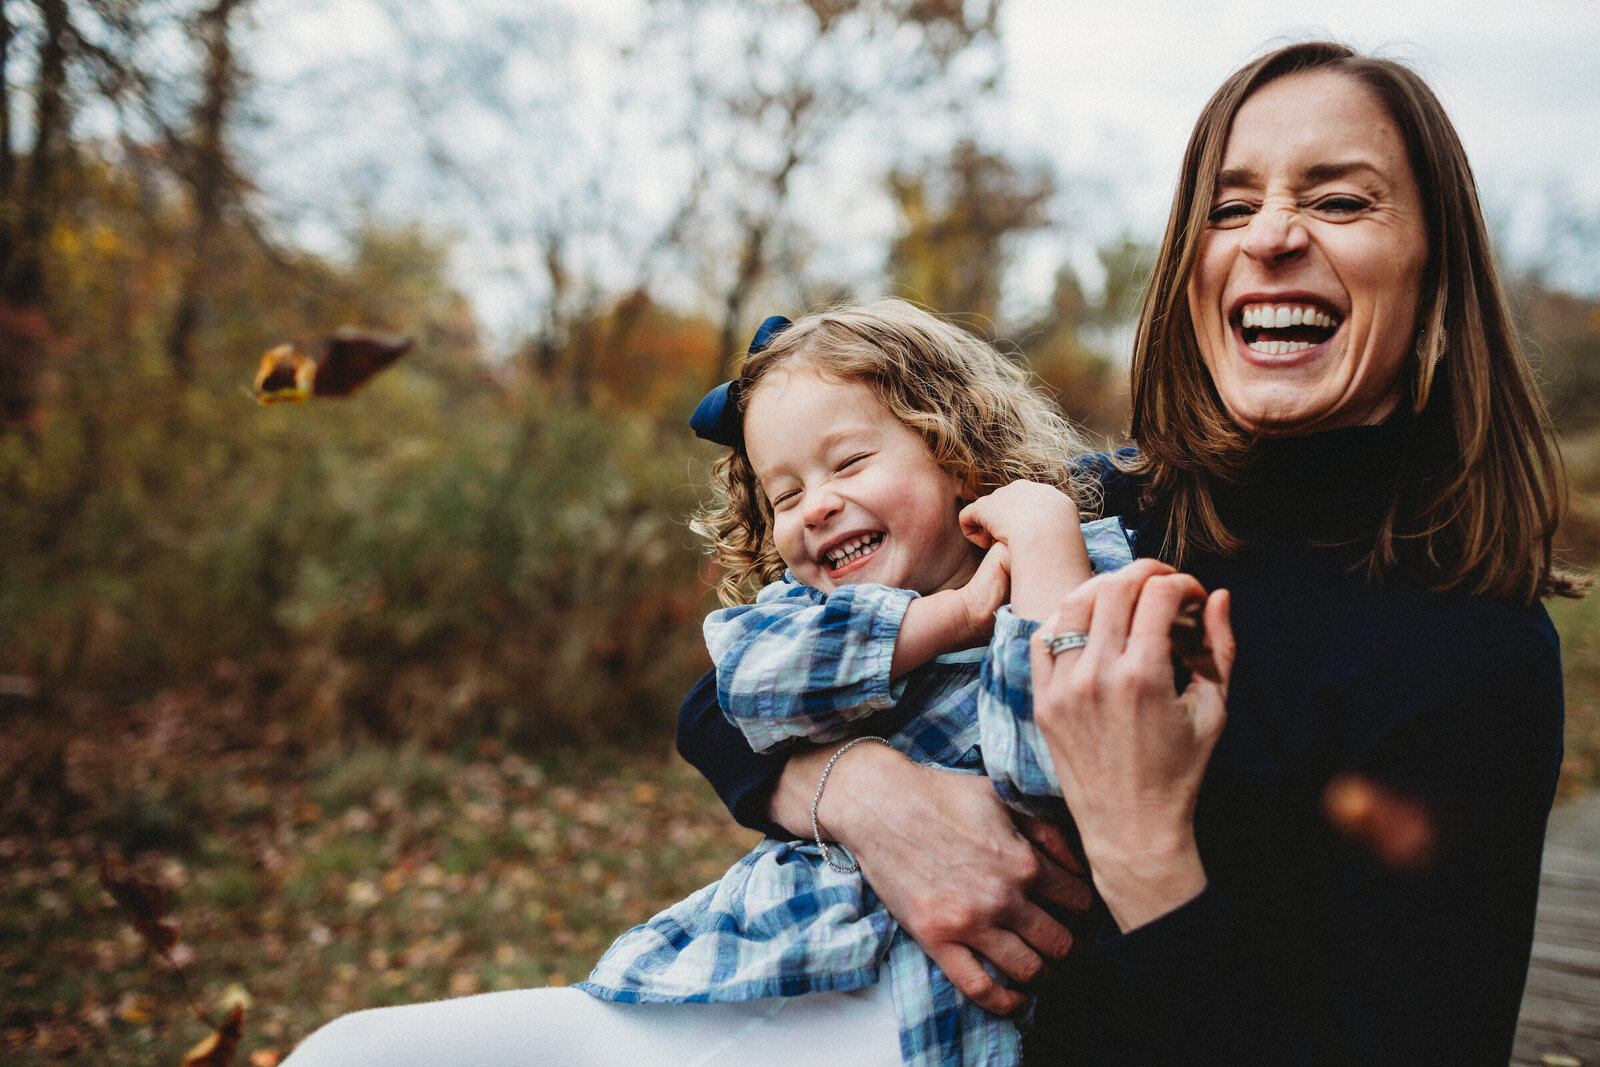 mom and daughter laugh playing in leaves in fall photo